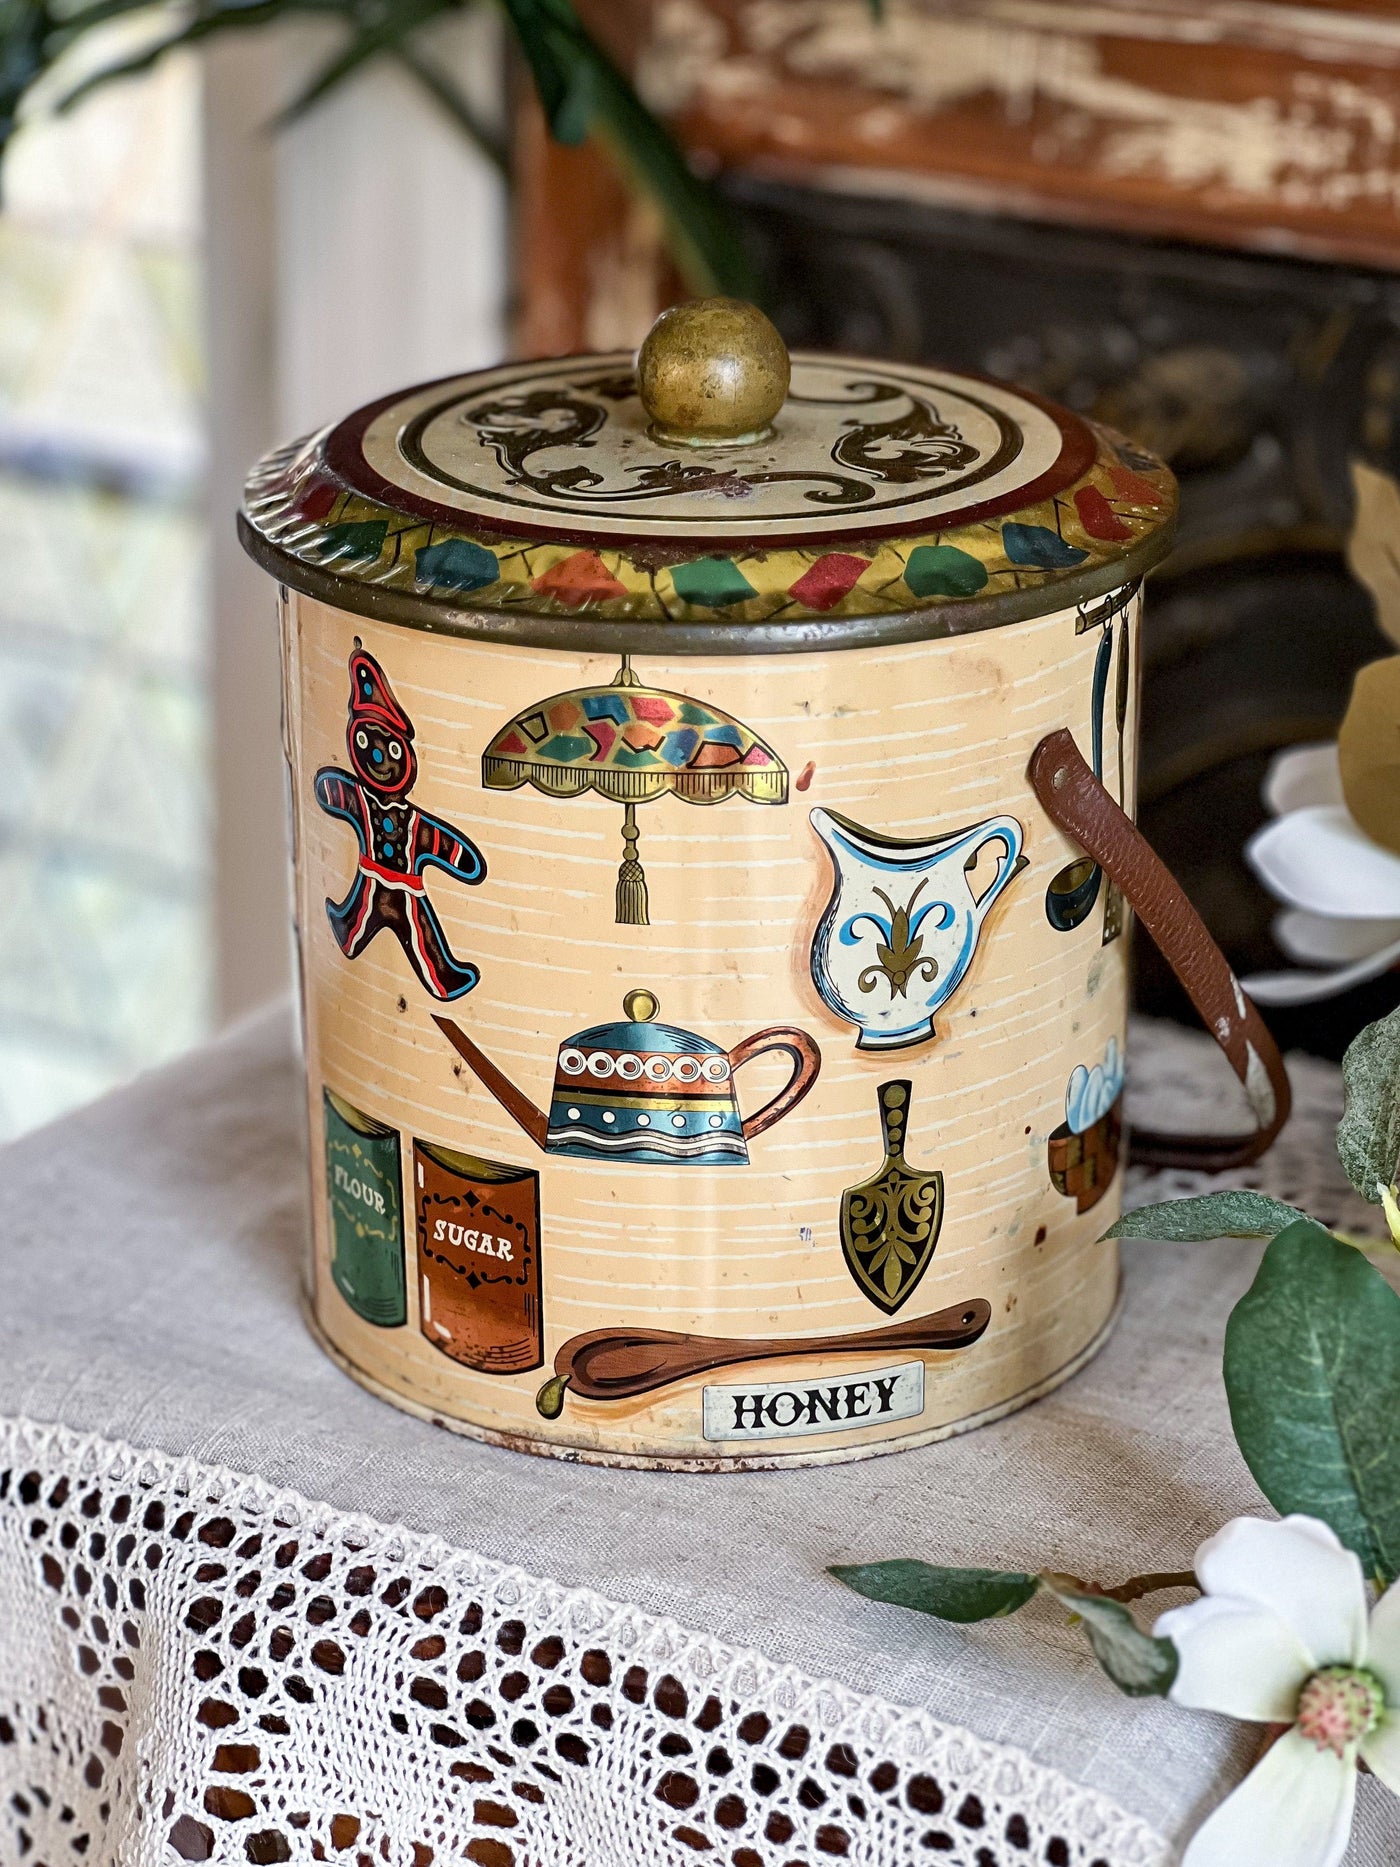 Somerset Vintage Biscuit Barrel Tin from England (1960's) Revive In Style Vintage Furniture Painted Refinished Redesign Beautiful One of a Kind Artistic Antique Unique Home Decor Interior Design French Country Shabby Chic Cottage Farmhouse Grandmillenial Coastal Chalk Paint Metallic Glam Eclectic Quality Dovetailed Rustic Furniture Painter Pinterest Bedroom Living Room Entryway Kitchen Home Trends House Styles Decorating ideas